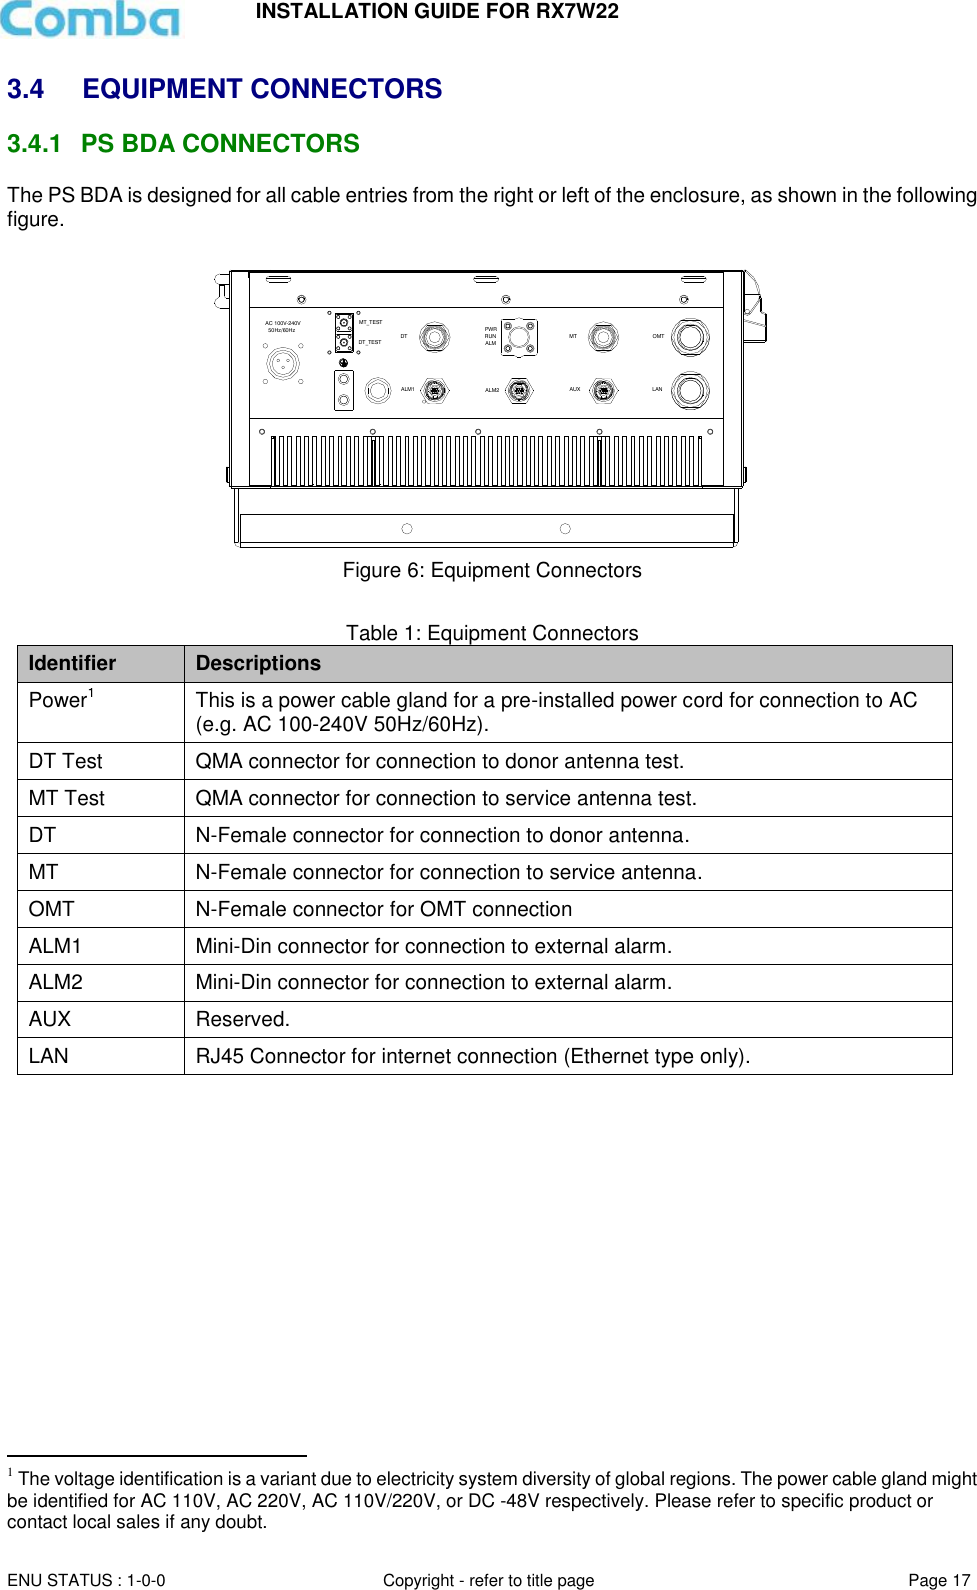 INSTALLATION GUIDE FOR RX7W22  ENU STATUS : 1-0-0 Copyright - refer to title page Page 17     3.4  EQUIPMENT CONNECTORS 3.4.1  PS BDA CONNECTORS The PS BDA is designed for all cable entries from the right or left of the enclosure, as shown in the following figure.    Figure 6: Equipment Connectors  Table 1: Equipment Connectors Identifier Descriptions Power1 This is a power cable gland for a pre-installed power cord for connection to AC (e.g. AC 100-240V 50Hz/60Hz). DT Test QMA connector for connection to donor antenna test.  MT Test QMA connector for connection to service antenna test. DT N-Female connector for connection to donor antenna.  MT N-Female connector for connection to service antenna.  OMT N-Female connector for OMT connection ALM1 Mini-Din connector for connection to external alarm. ALM2 Mini-Din connector for connection to external alarm. AUX Reserved. LAN RJ45 Connector for internet connection (Ethernet type only).                                                     1 The voltage identification is a variant due to electricity system diversity of global regions. The power cable gland might be identified for AC 110V, AC 220V, AC 110V/220V, or DC -48V respectively. Please refer to specific product or contact local sales if any doubt. DT MTAC 100V-240V  50Hz/60HzAUXPWRALMRUNALM1MT_TESTDT_TESTLANOMTALM2